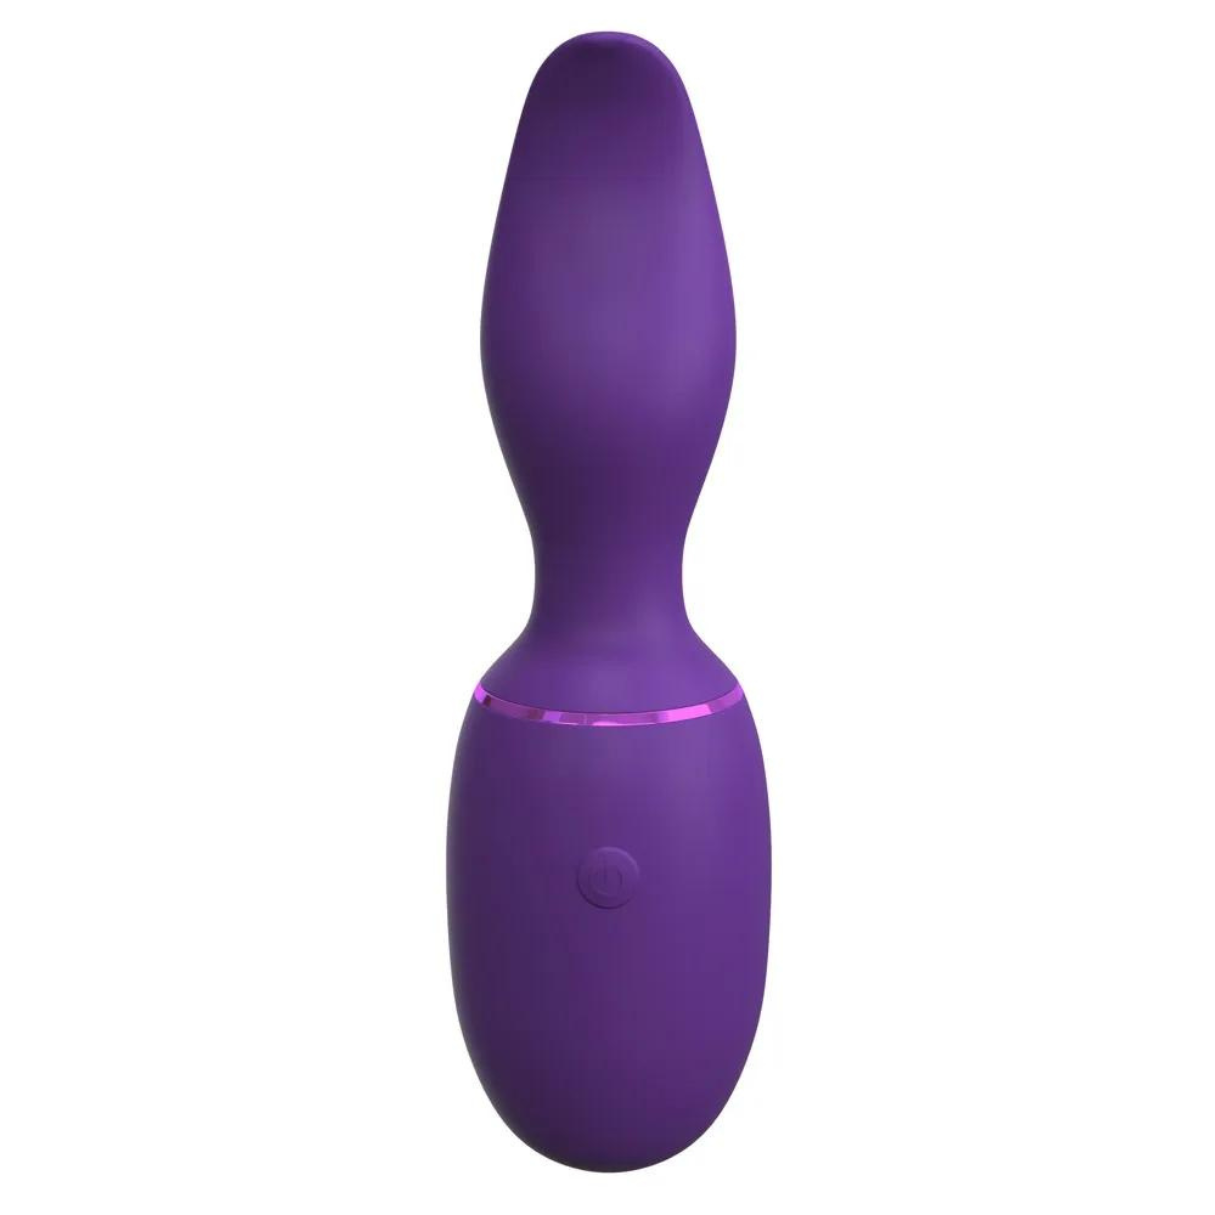 FANTASY FOR HER Her Vibrator Tongue-Gasm ultimate